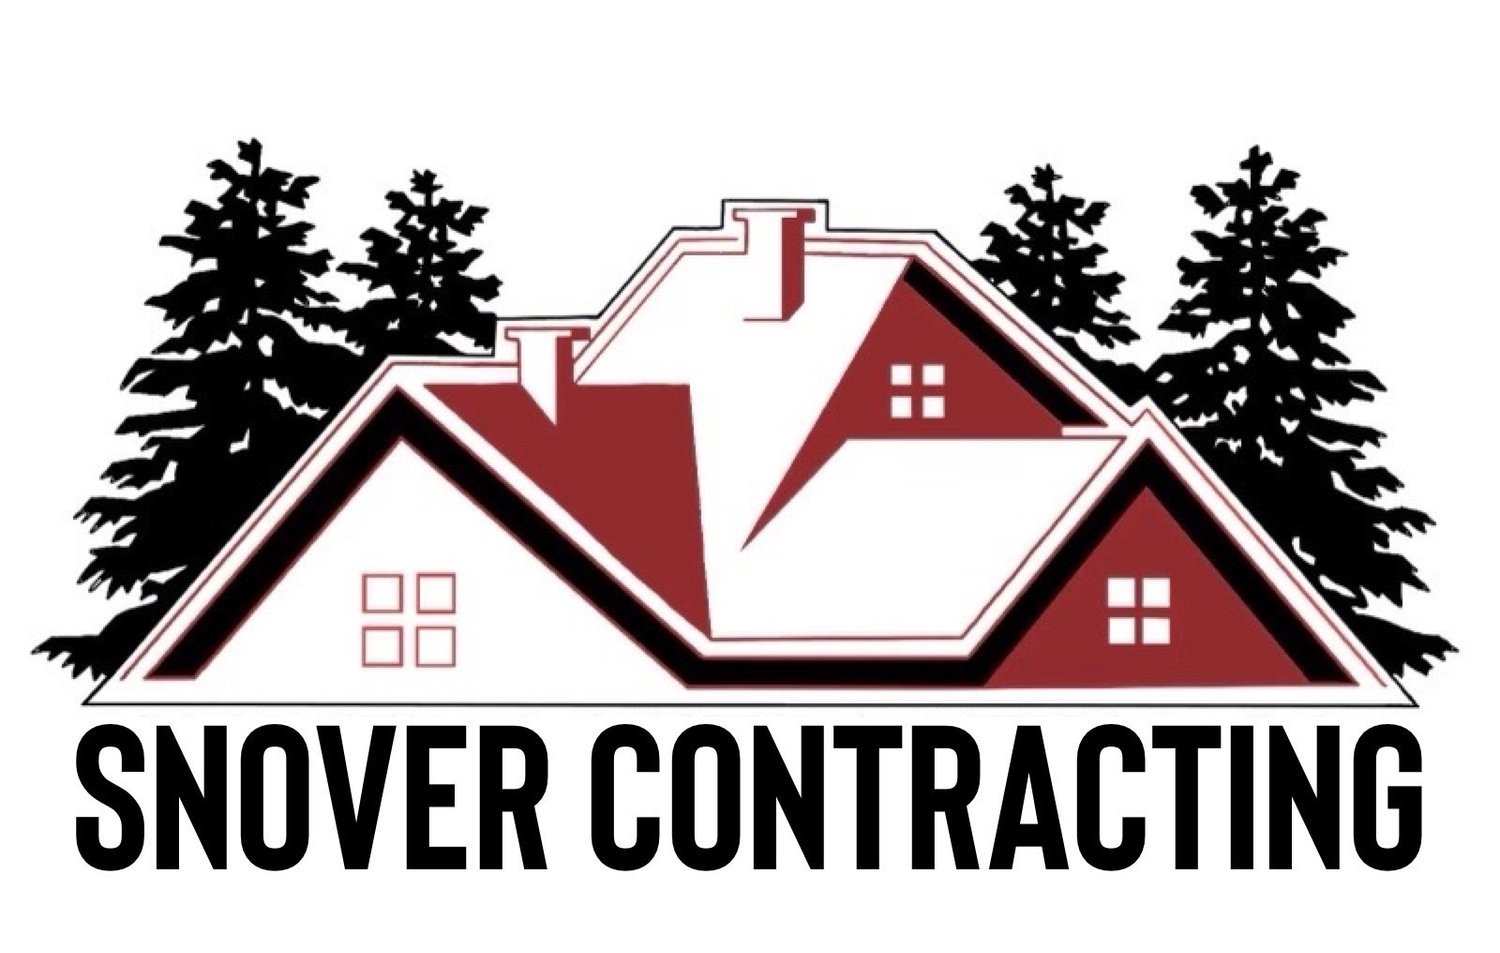 Snover Contracting